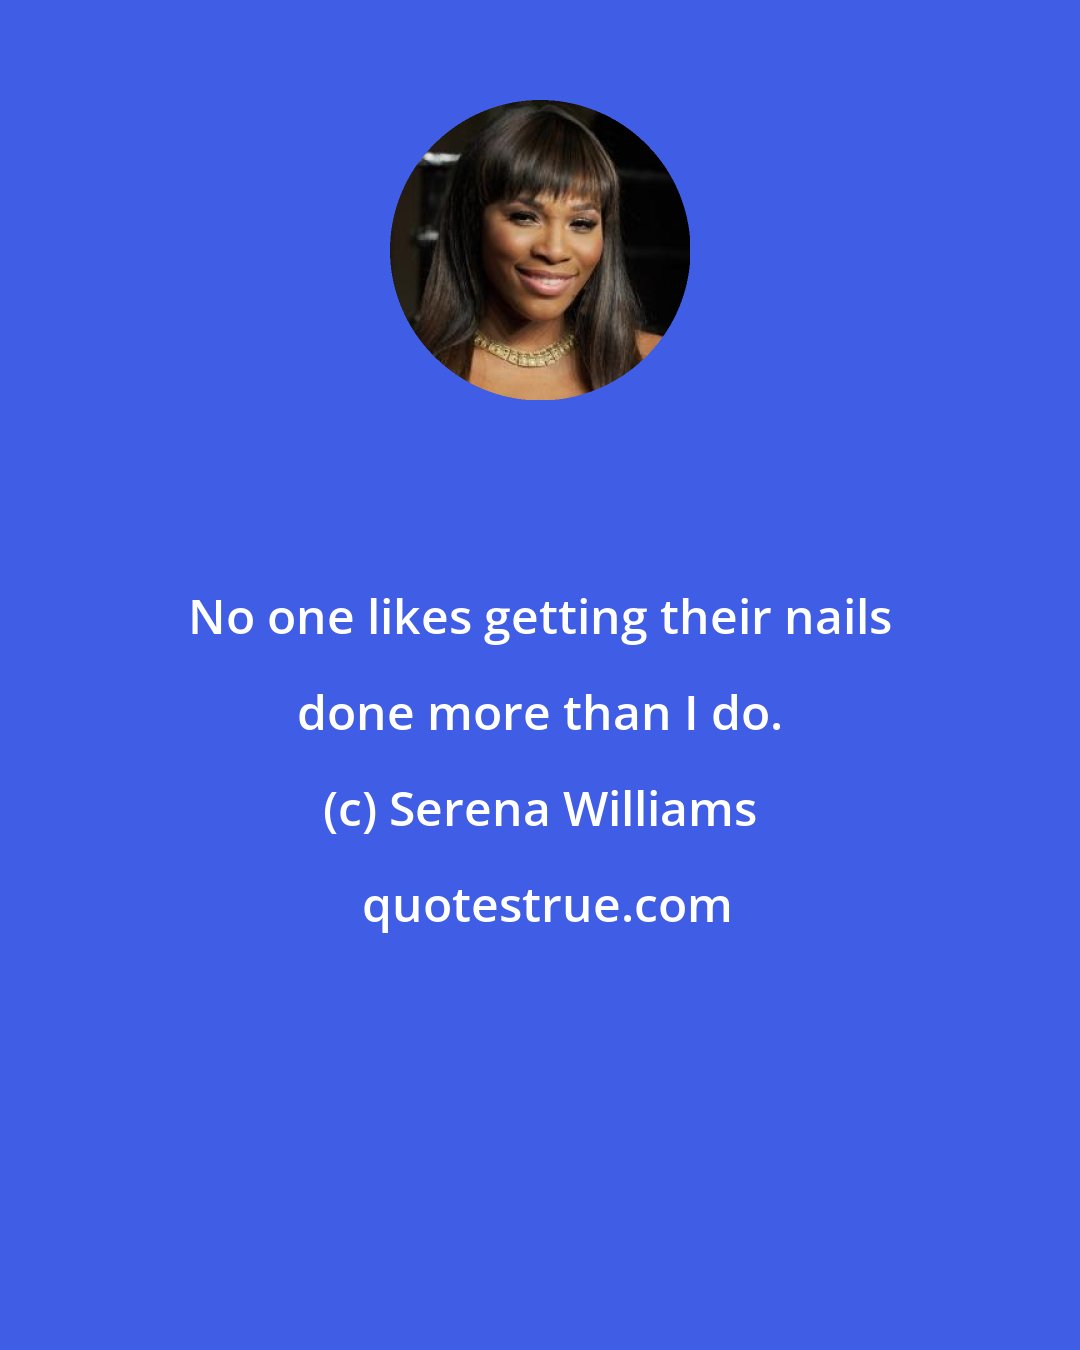 Serena Williams: No one likes getting their nails done more than I do.